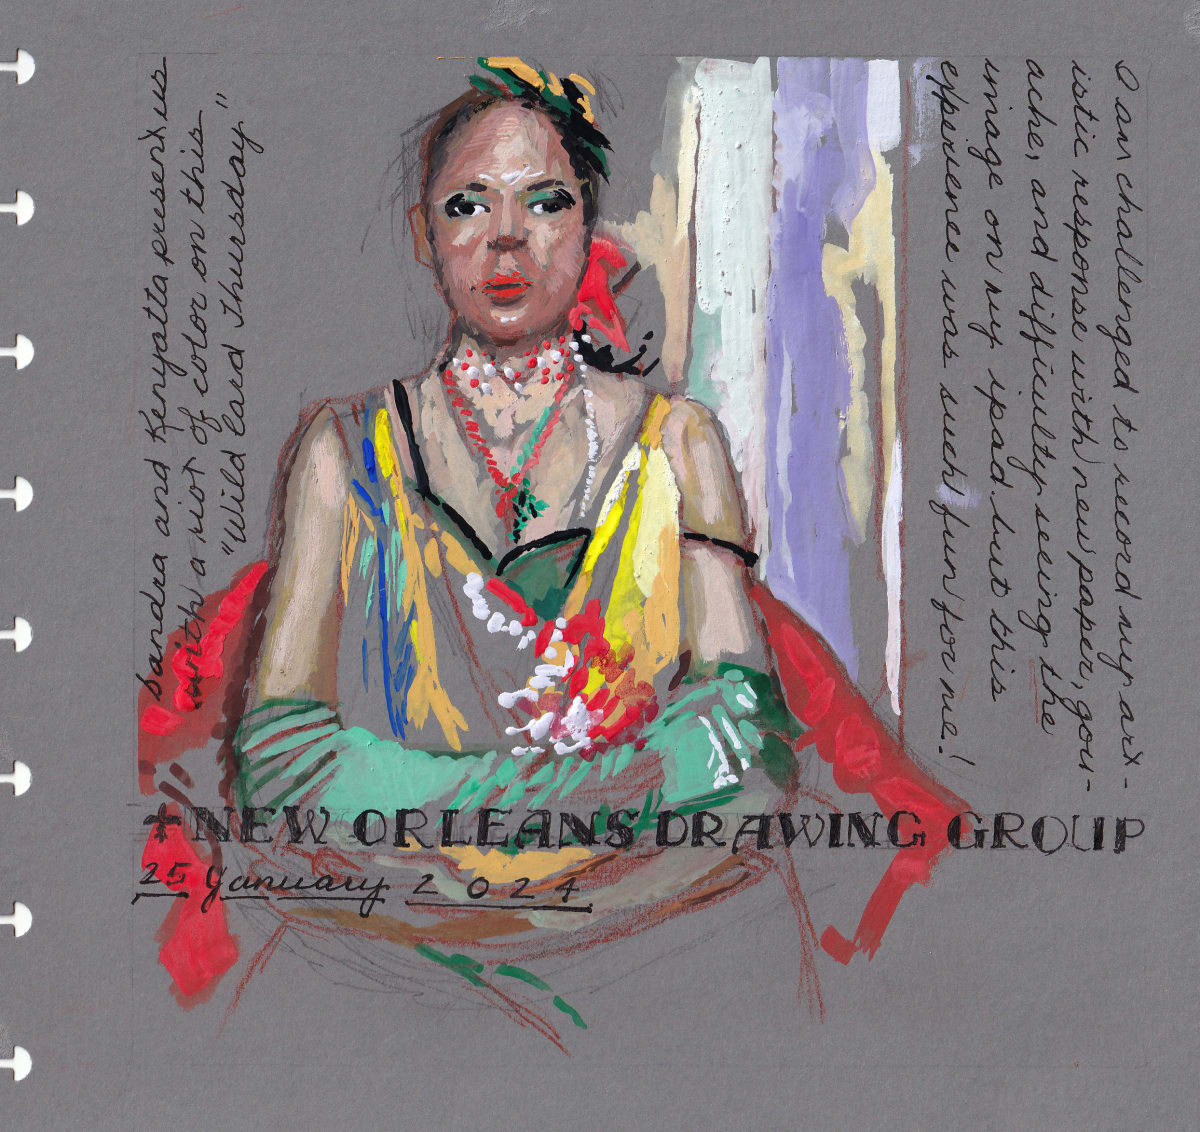 Journey Daybook Page by Margaret Pulis Herrick (Peggy)  Image: Kenyatta models for the NODG on "Wild Card" Thursday with an emphasis on color